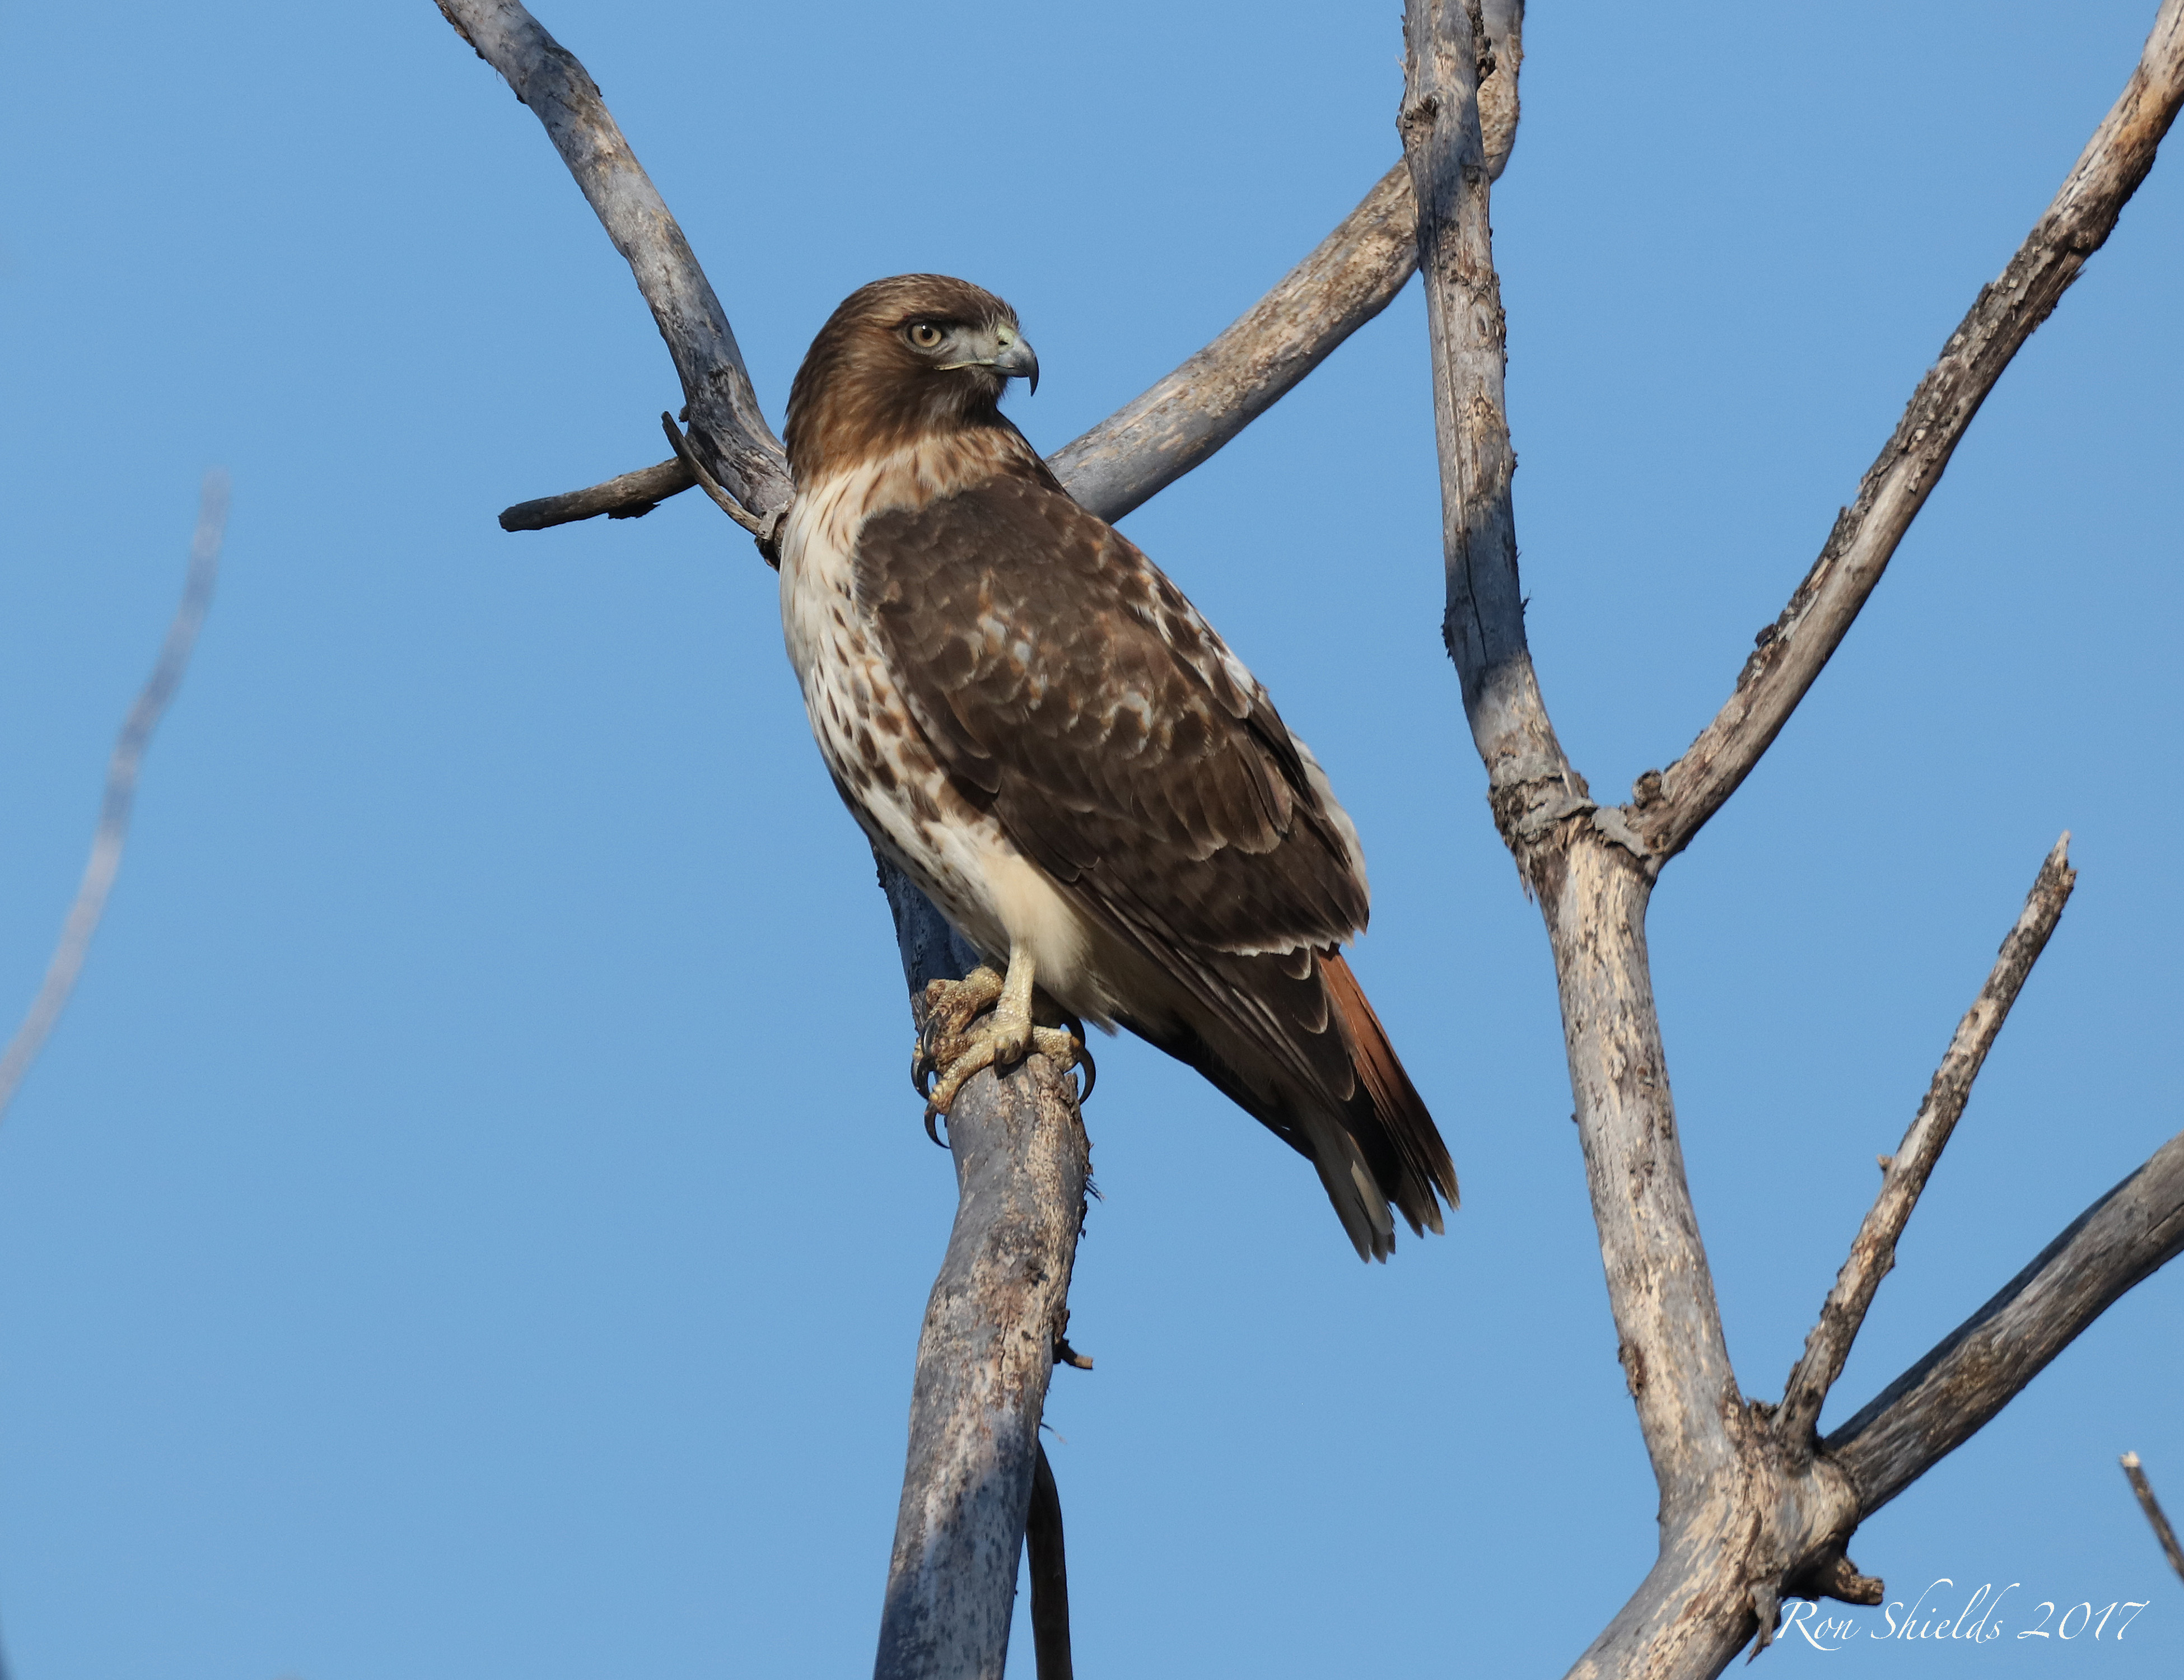 Adult Red-tailed Hawk at River Barge Park